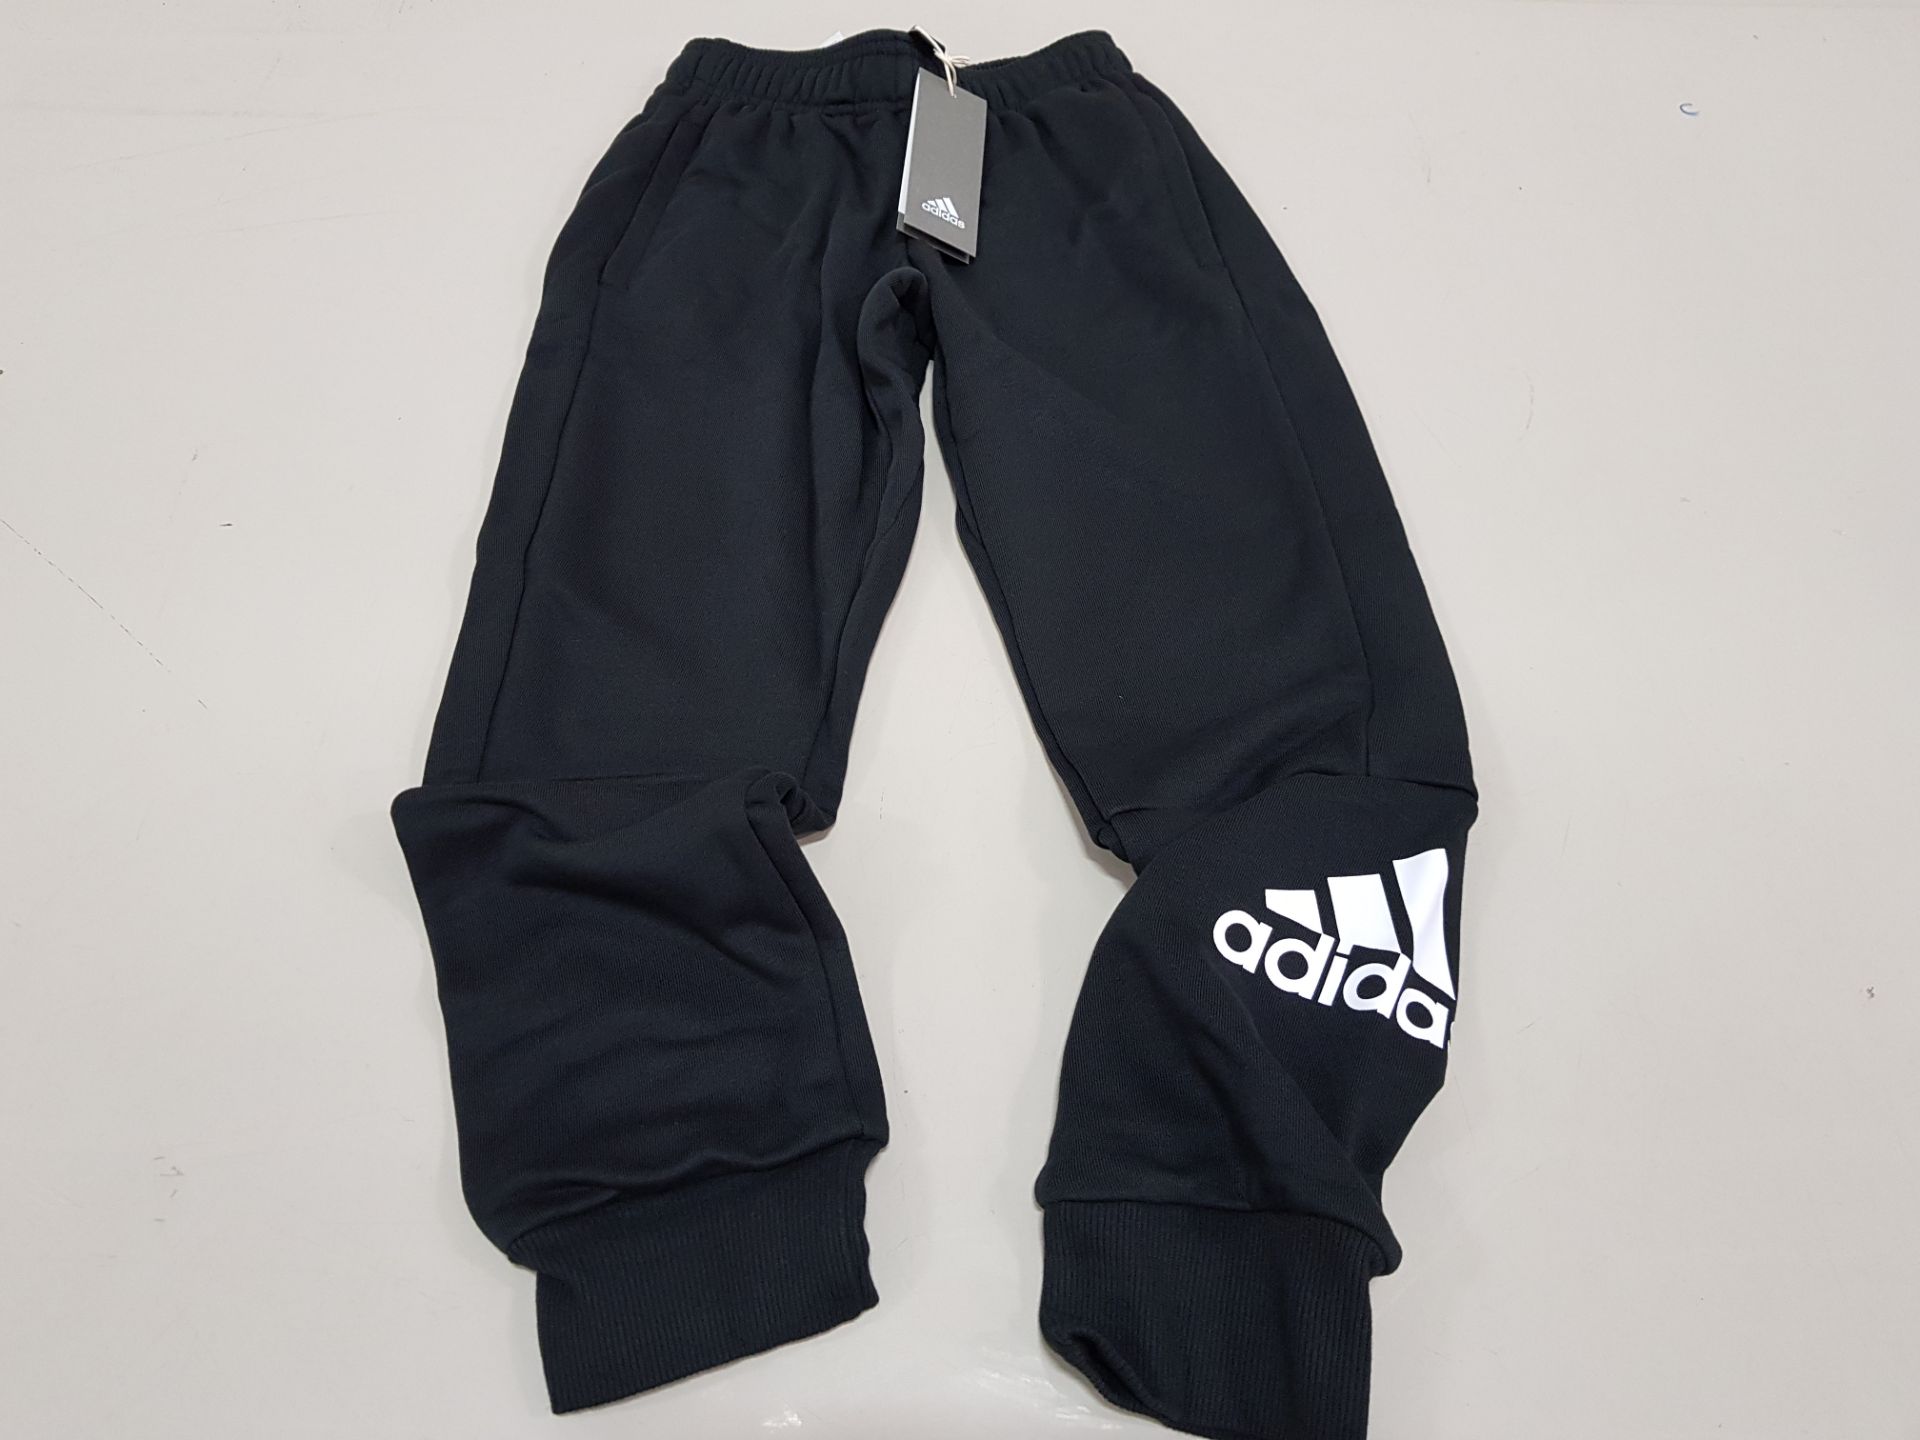 APPROX 17 X BLACK ADIDAS PANTS SIZE 15-16 YEARS